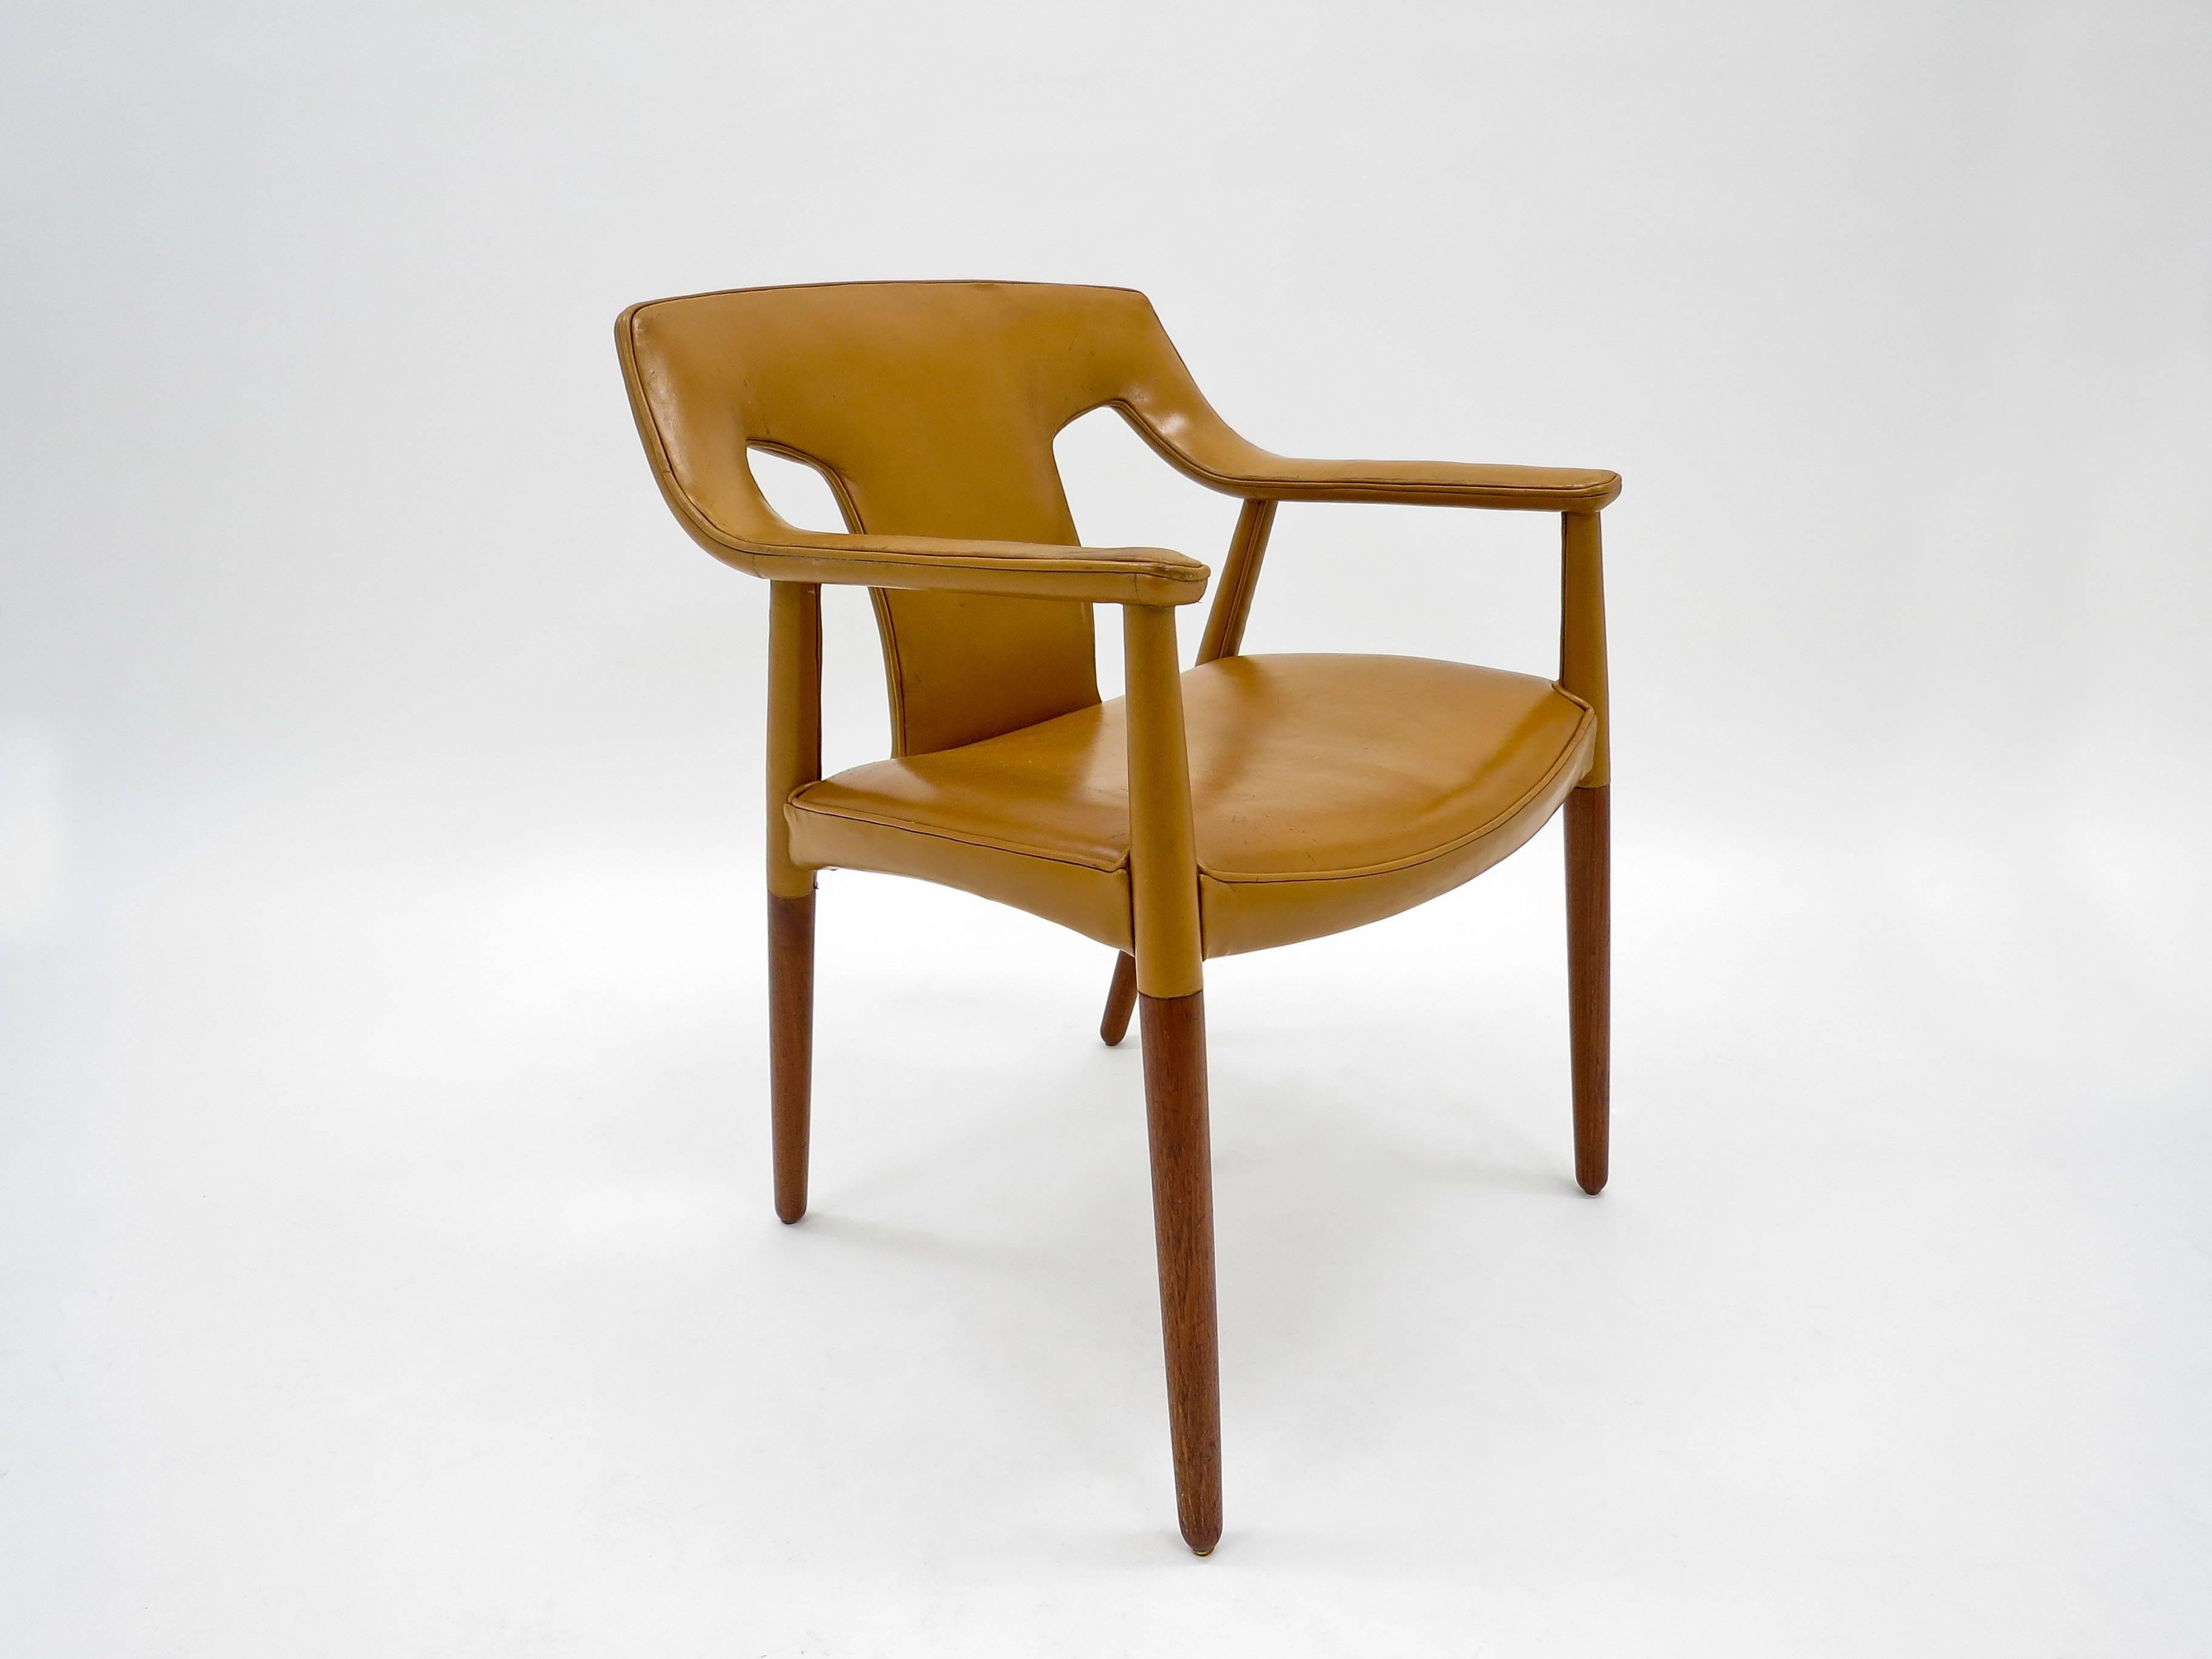 A beautiful and rare Danish armchair of sculptural form in teak and tan leather by Ejner Larsen and Aksel Bender Madsen, produced by master cabinetmaker Ludvig Pontoppidan.
A curved back splat that flows into the armrests supported by teak legs,